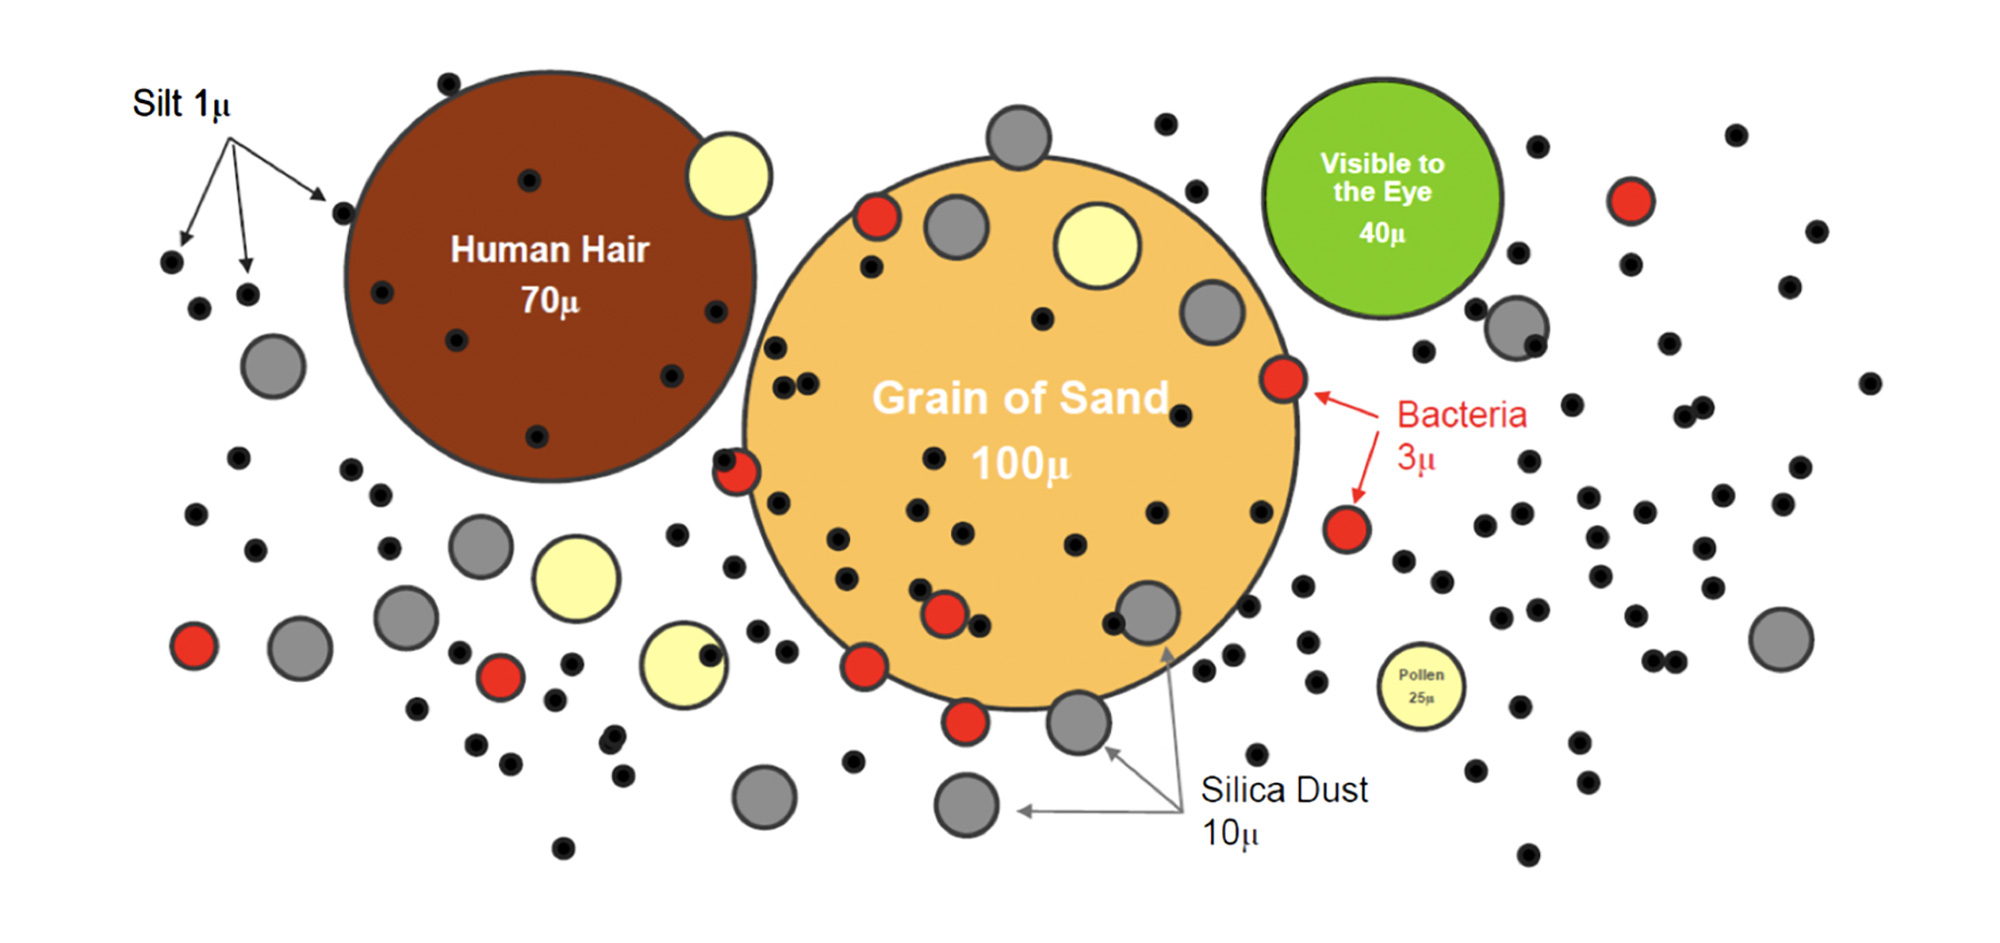 IMAGE 1: Potential contamination particles found in lubricants (Images courtesy of SEPCO)